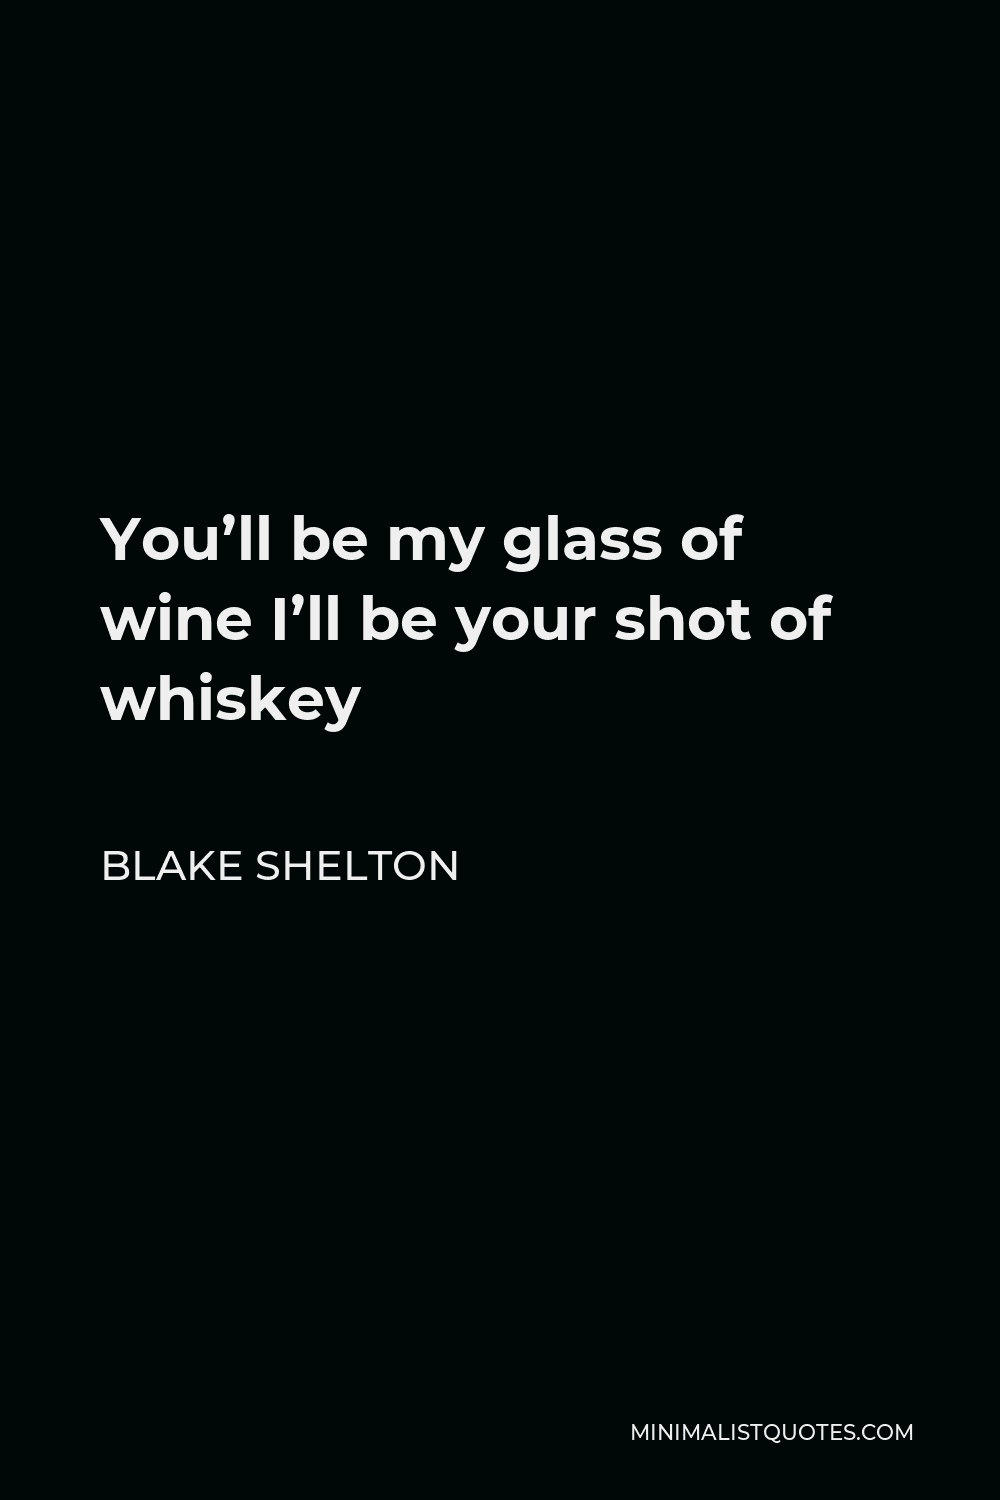 Blake Shelton Quote - You’ll be my glass of wine I’ll be your shot of whiskey